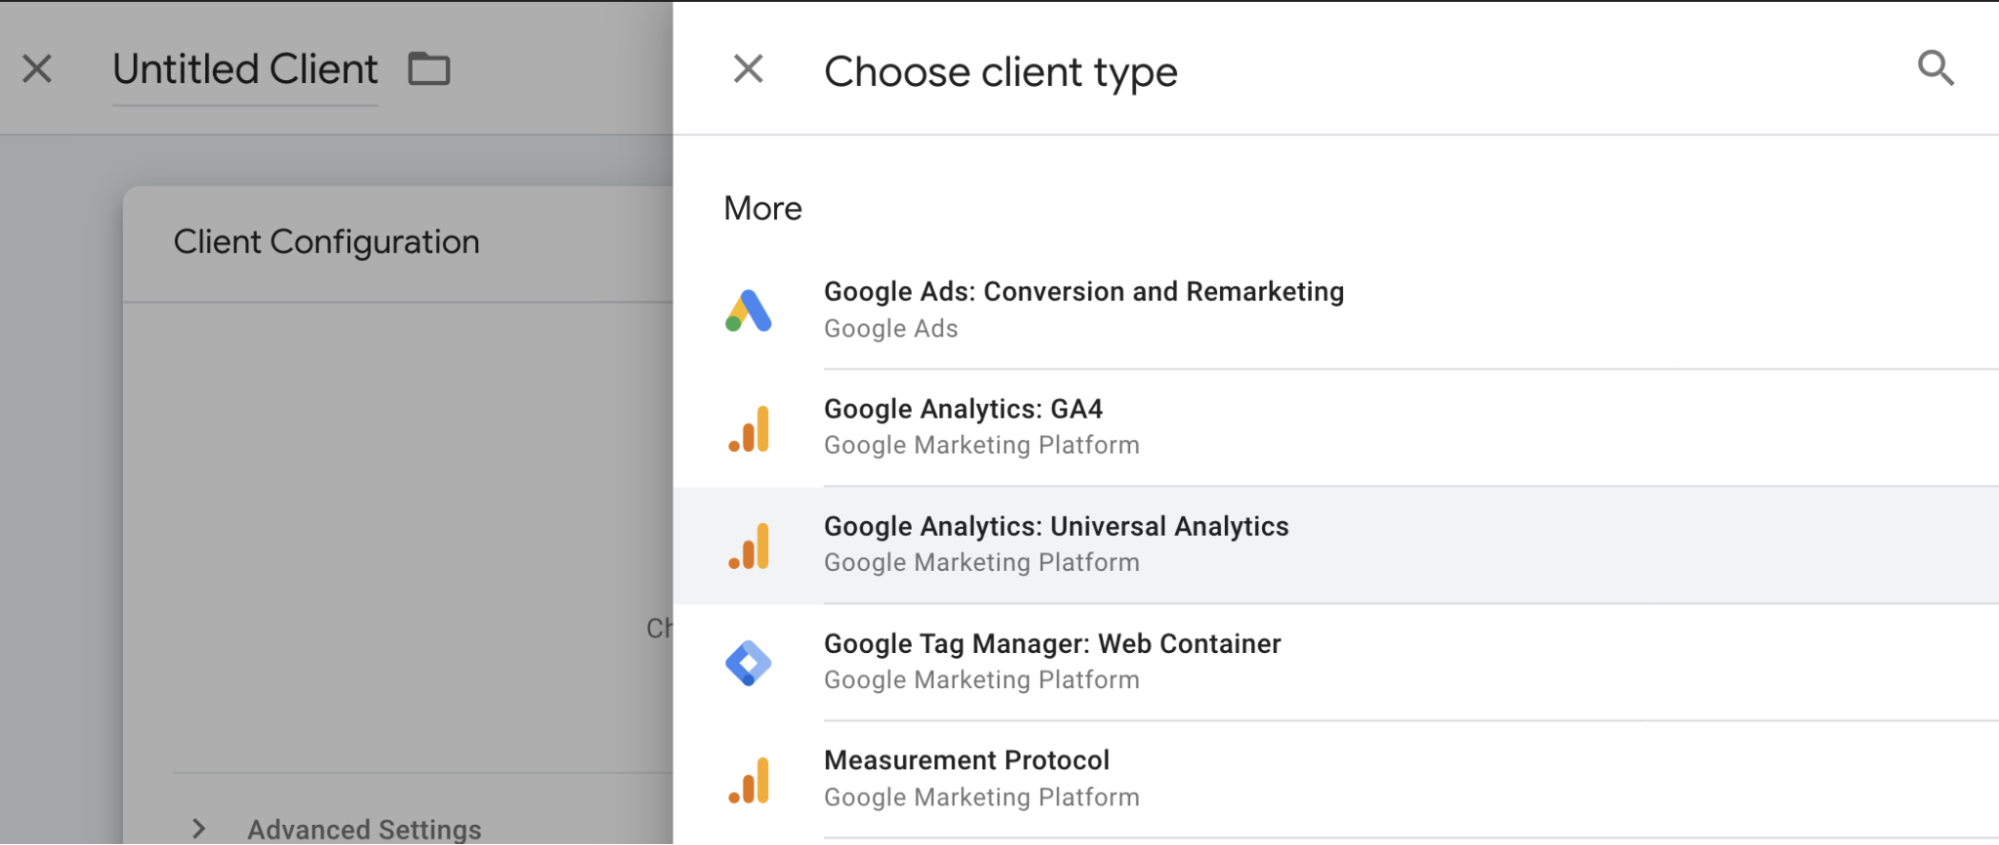 Choose
client type dialog with Google Analytics: Universal Analytics client
highlighted